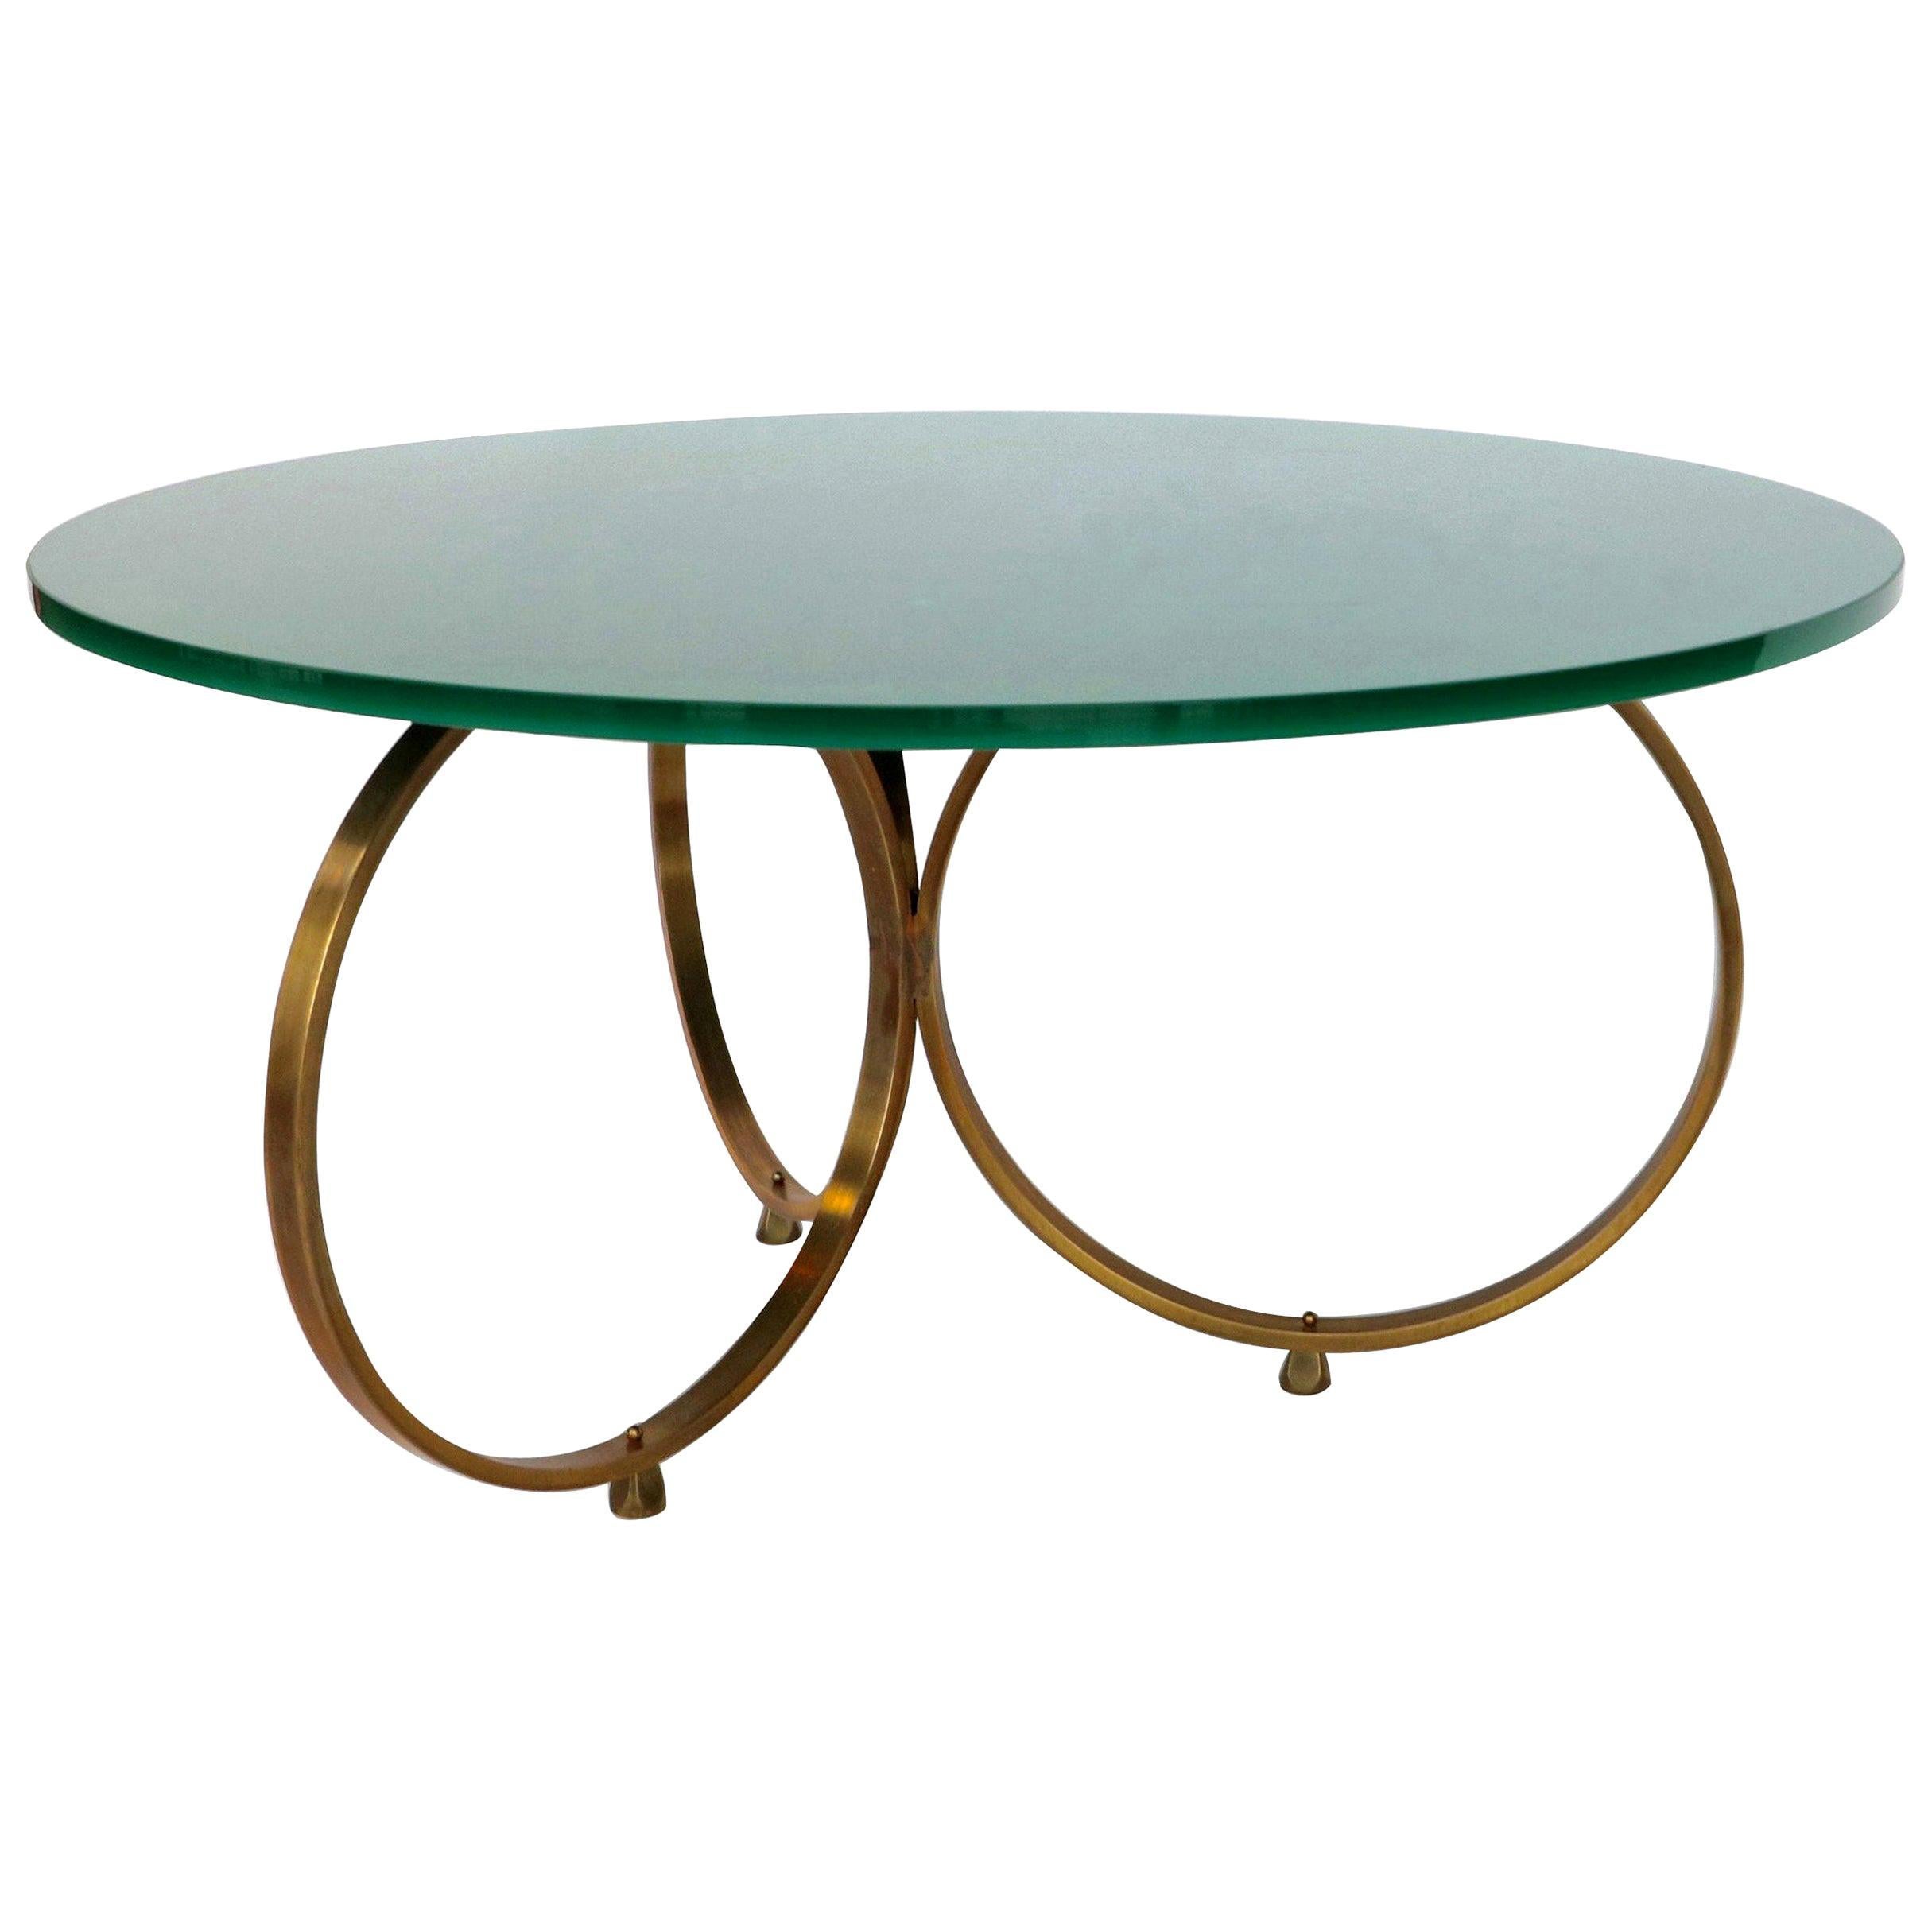 Custom Brass Coffee Table with Green Reverse Painted Glass Top by Adesso Imports